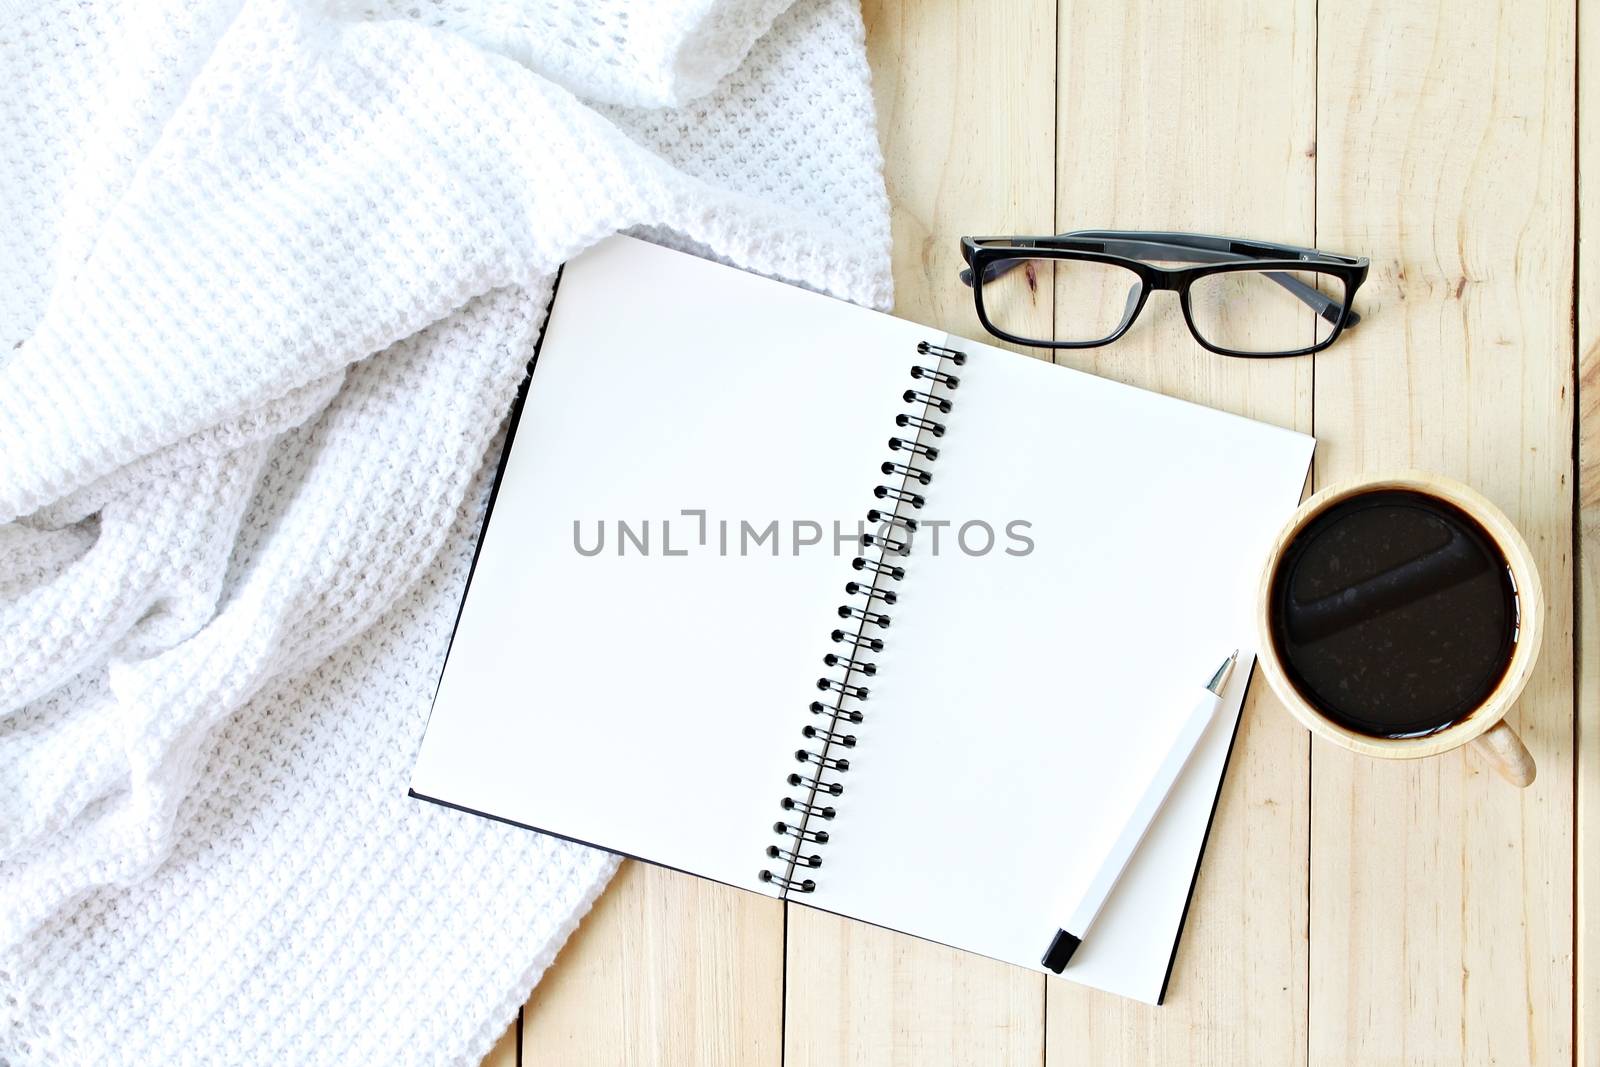 Business, Holiday or weekend concept : Flat lay of white knitted blanket, eyeglasses, cup of coffee and blank notebook paper on wooden background